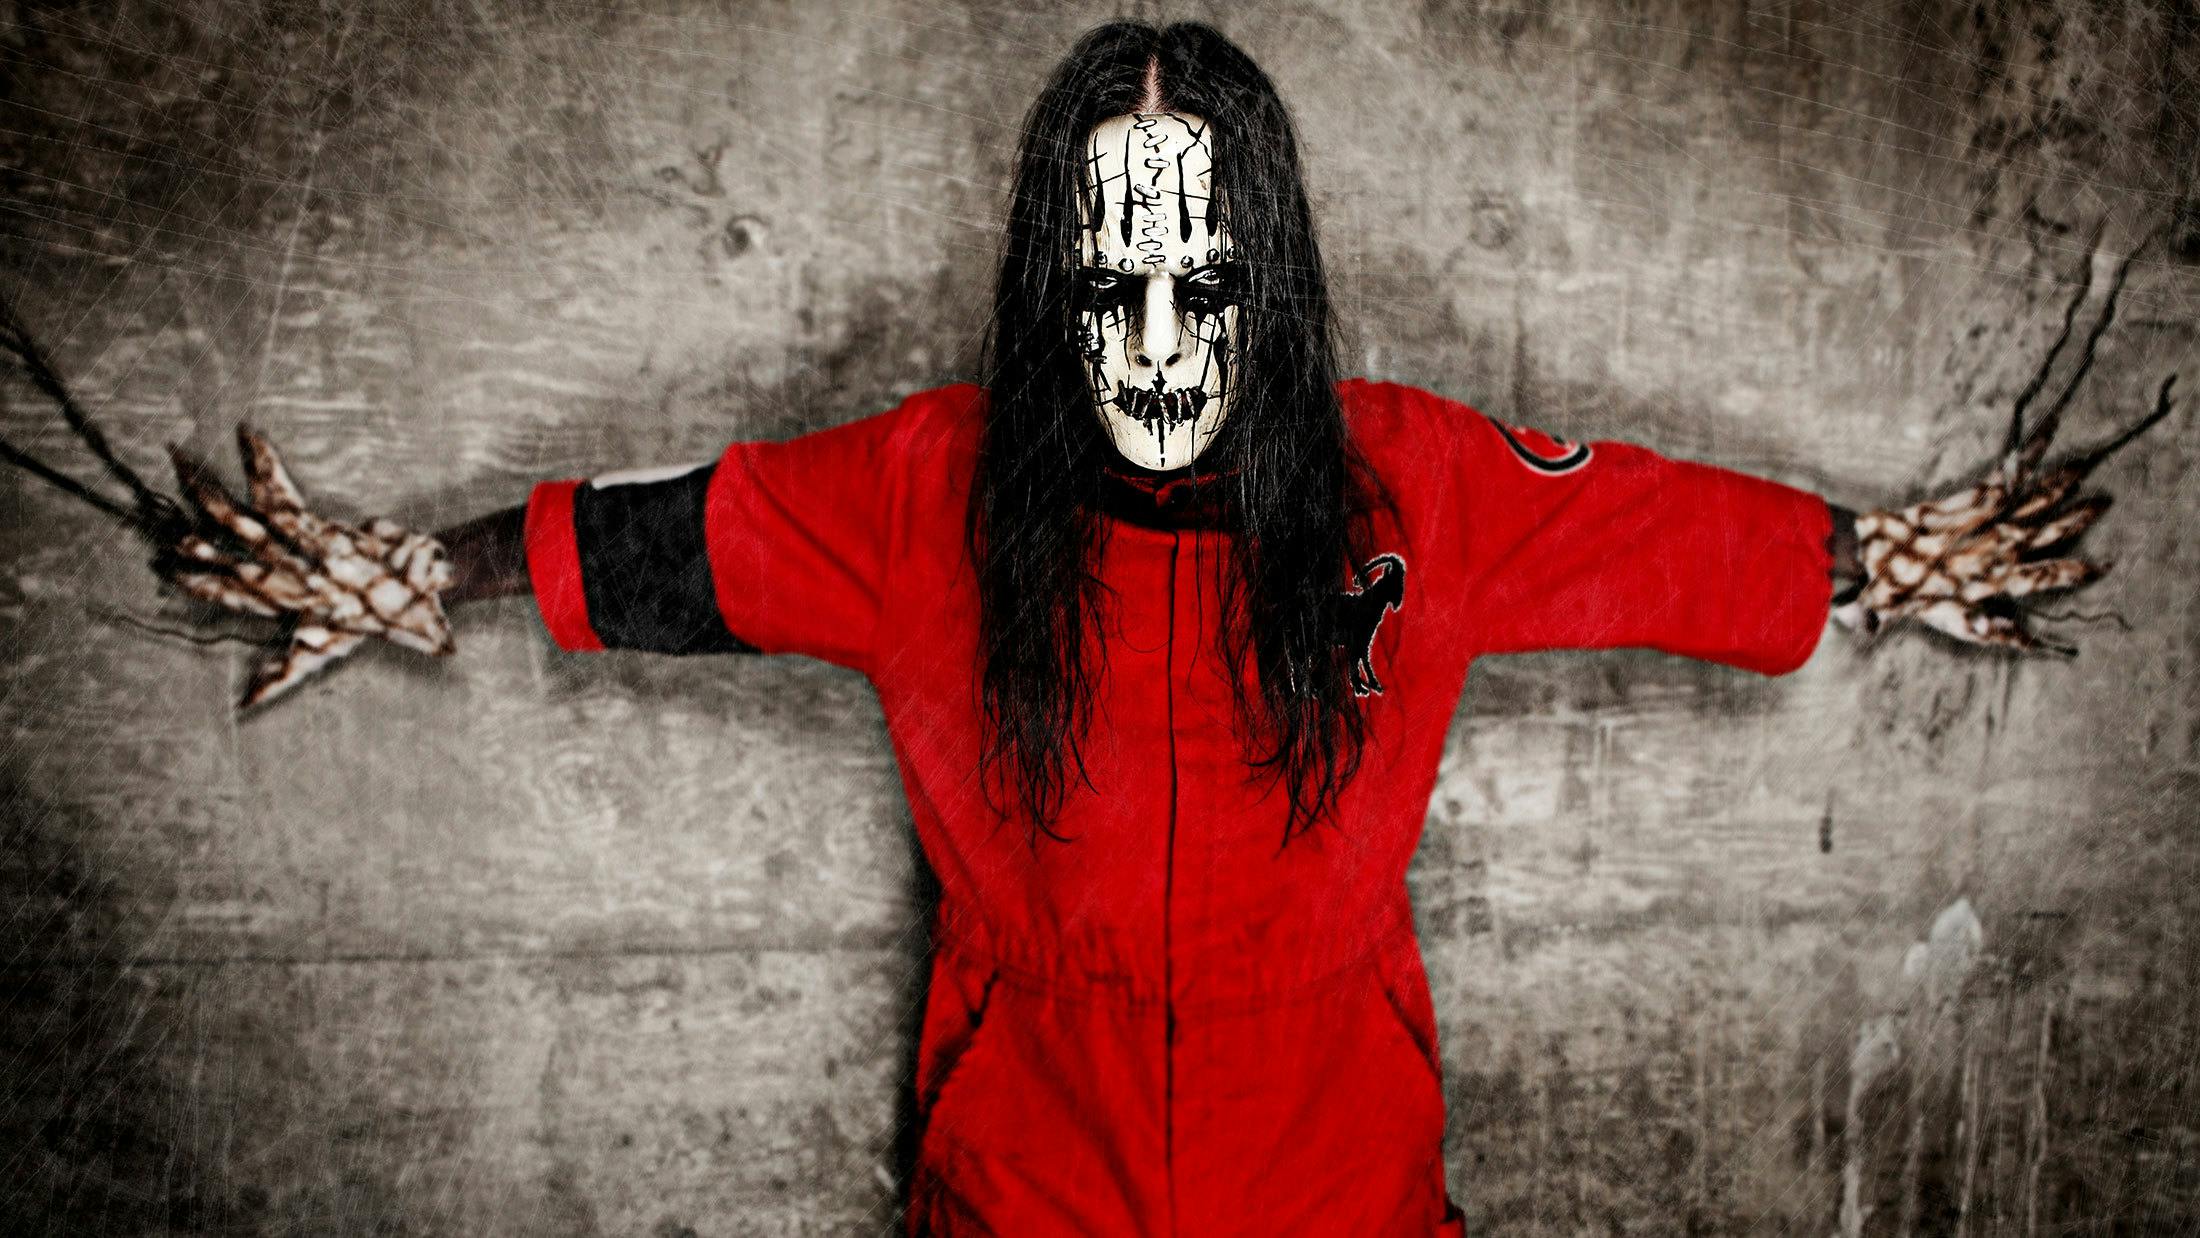 GRAMMYs executive producer apologises for 2022 In Memoriam omissions such as Joey Jordison